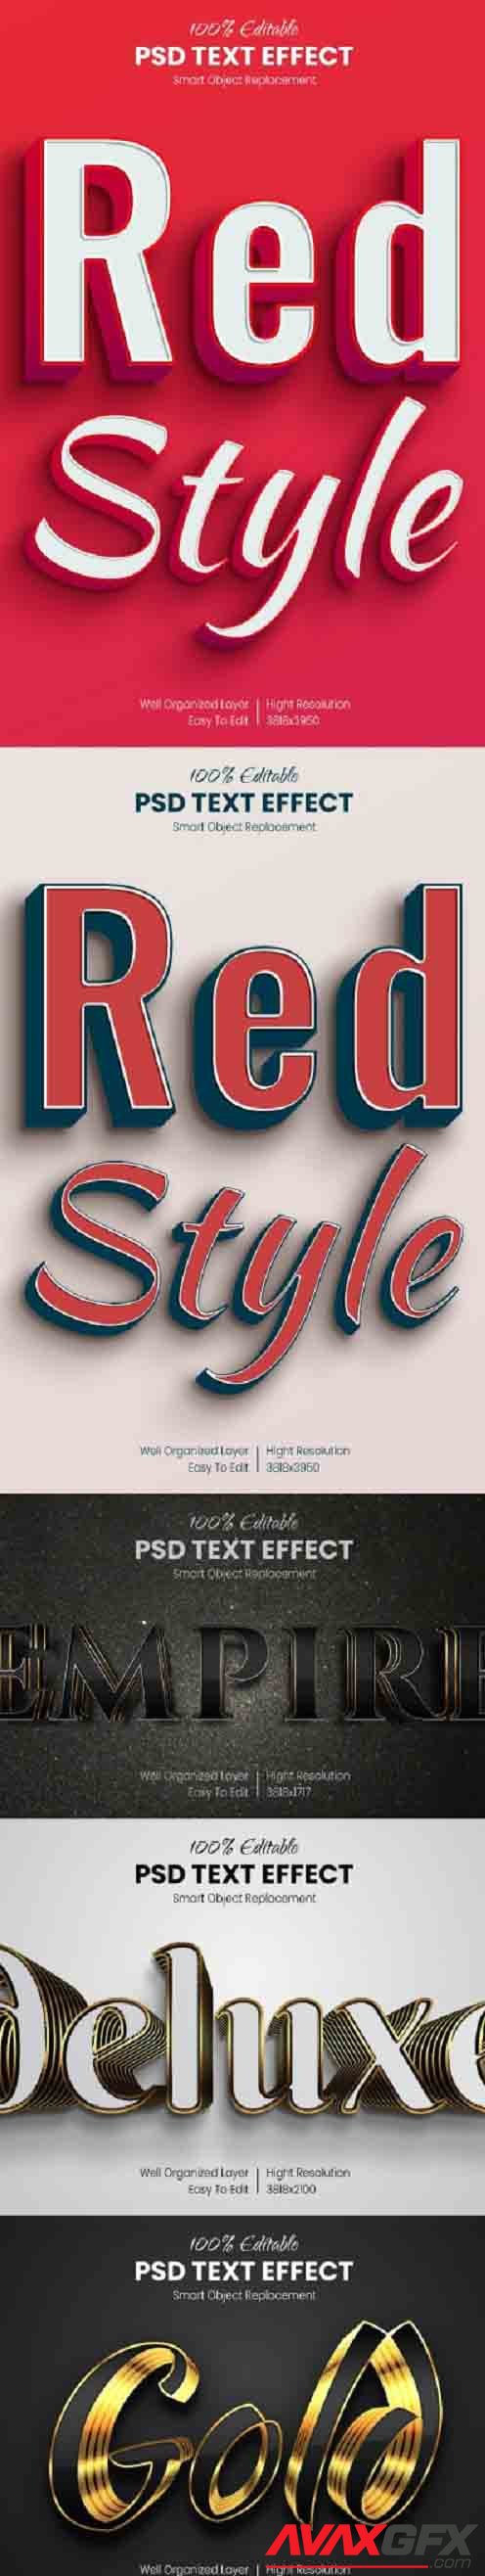 GraphicRiver - 13 Photoshop Text Effects - Luxury Styles 30702118